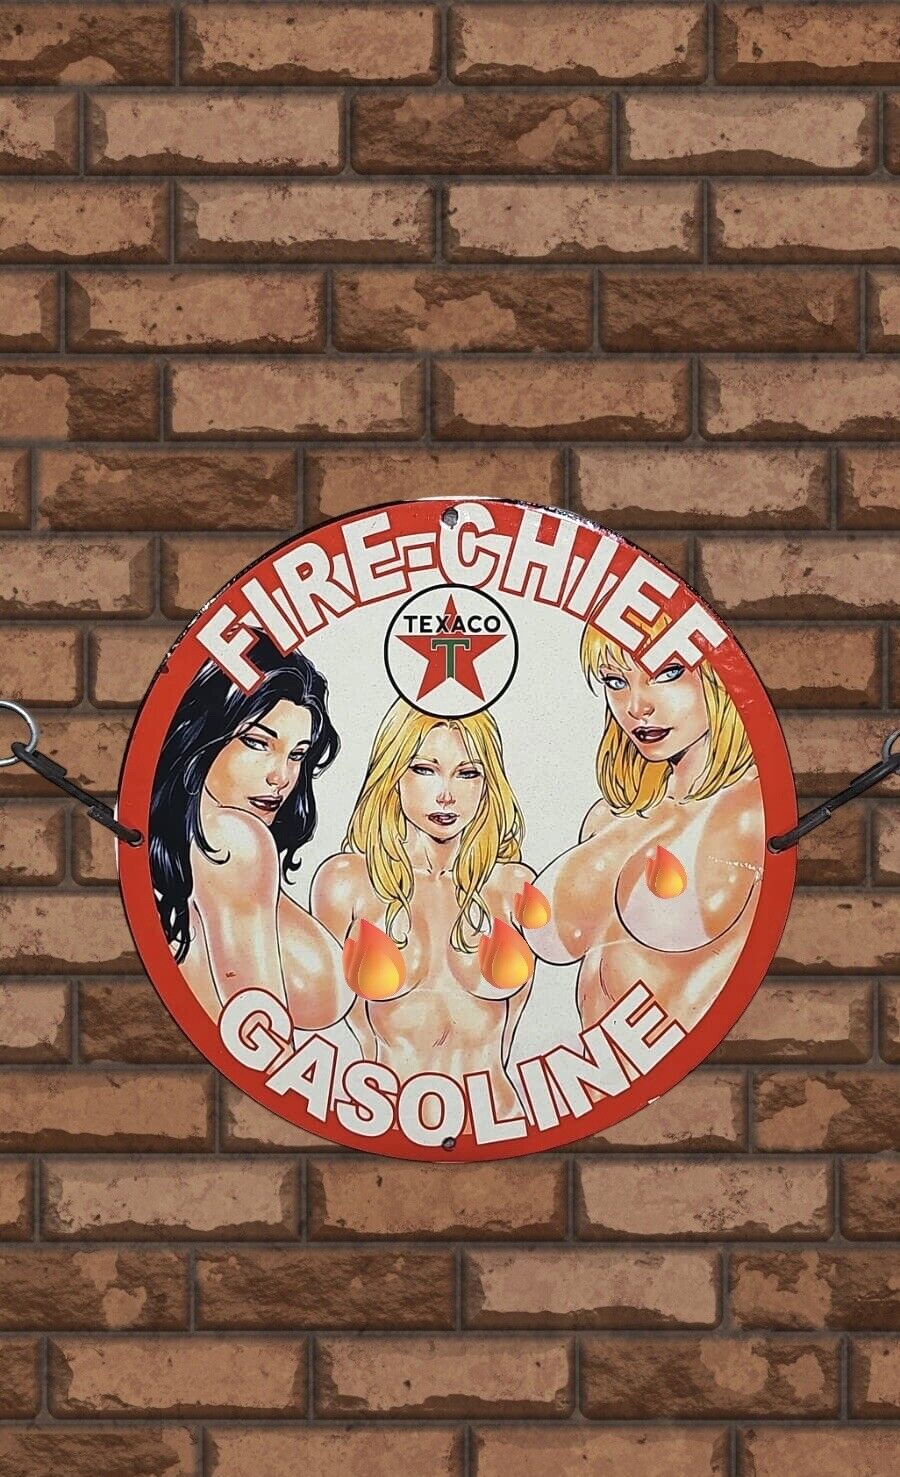 TEXACO FIRE-CHIEF PINUP BABE PORCELAIN GAS STATION PUMP OIL SERVICE GARAGE SIGN